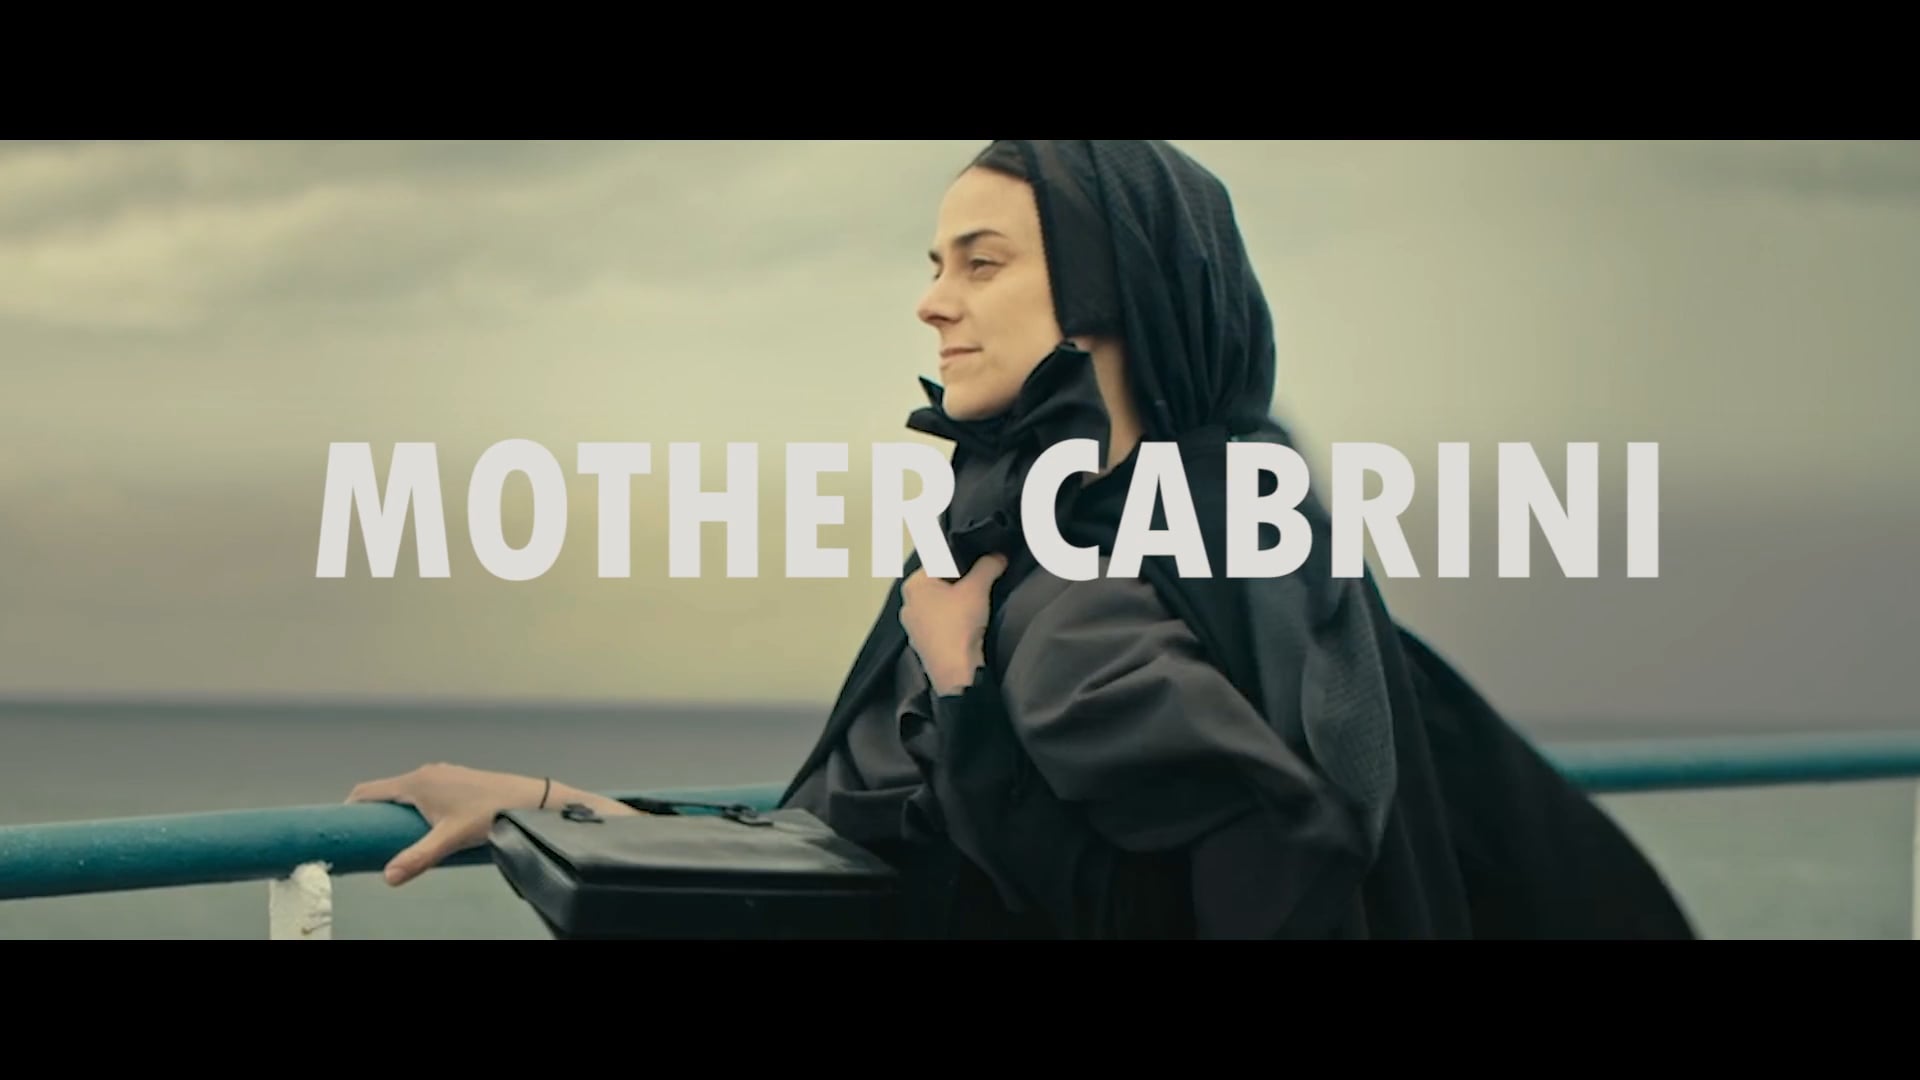 Mother Cabrini - Official Trailer on Vimeo